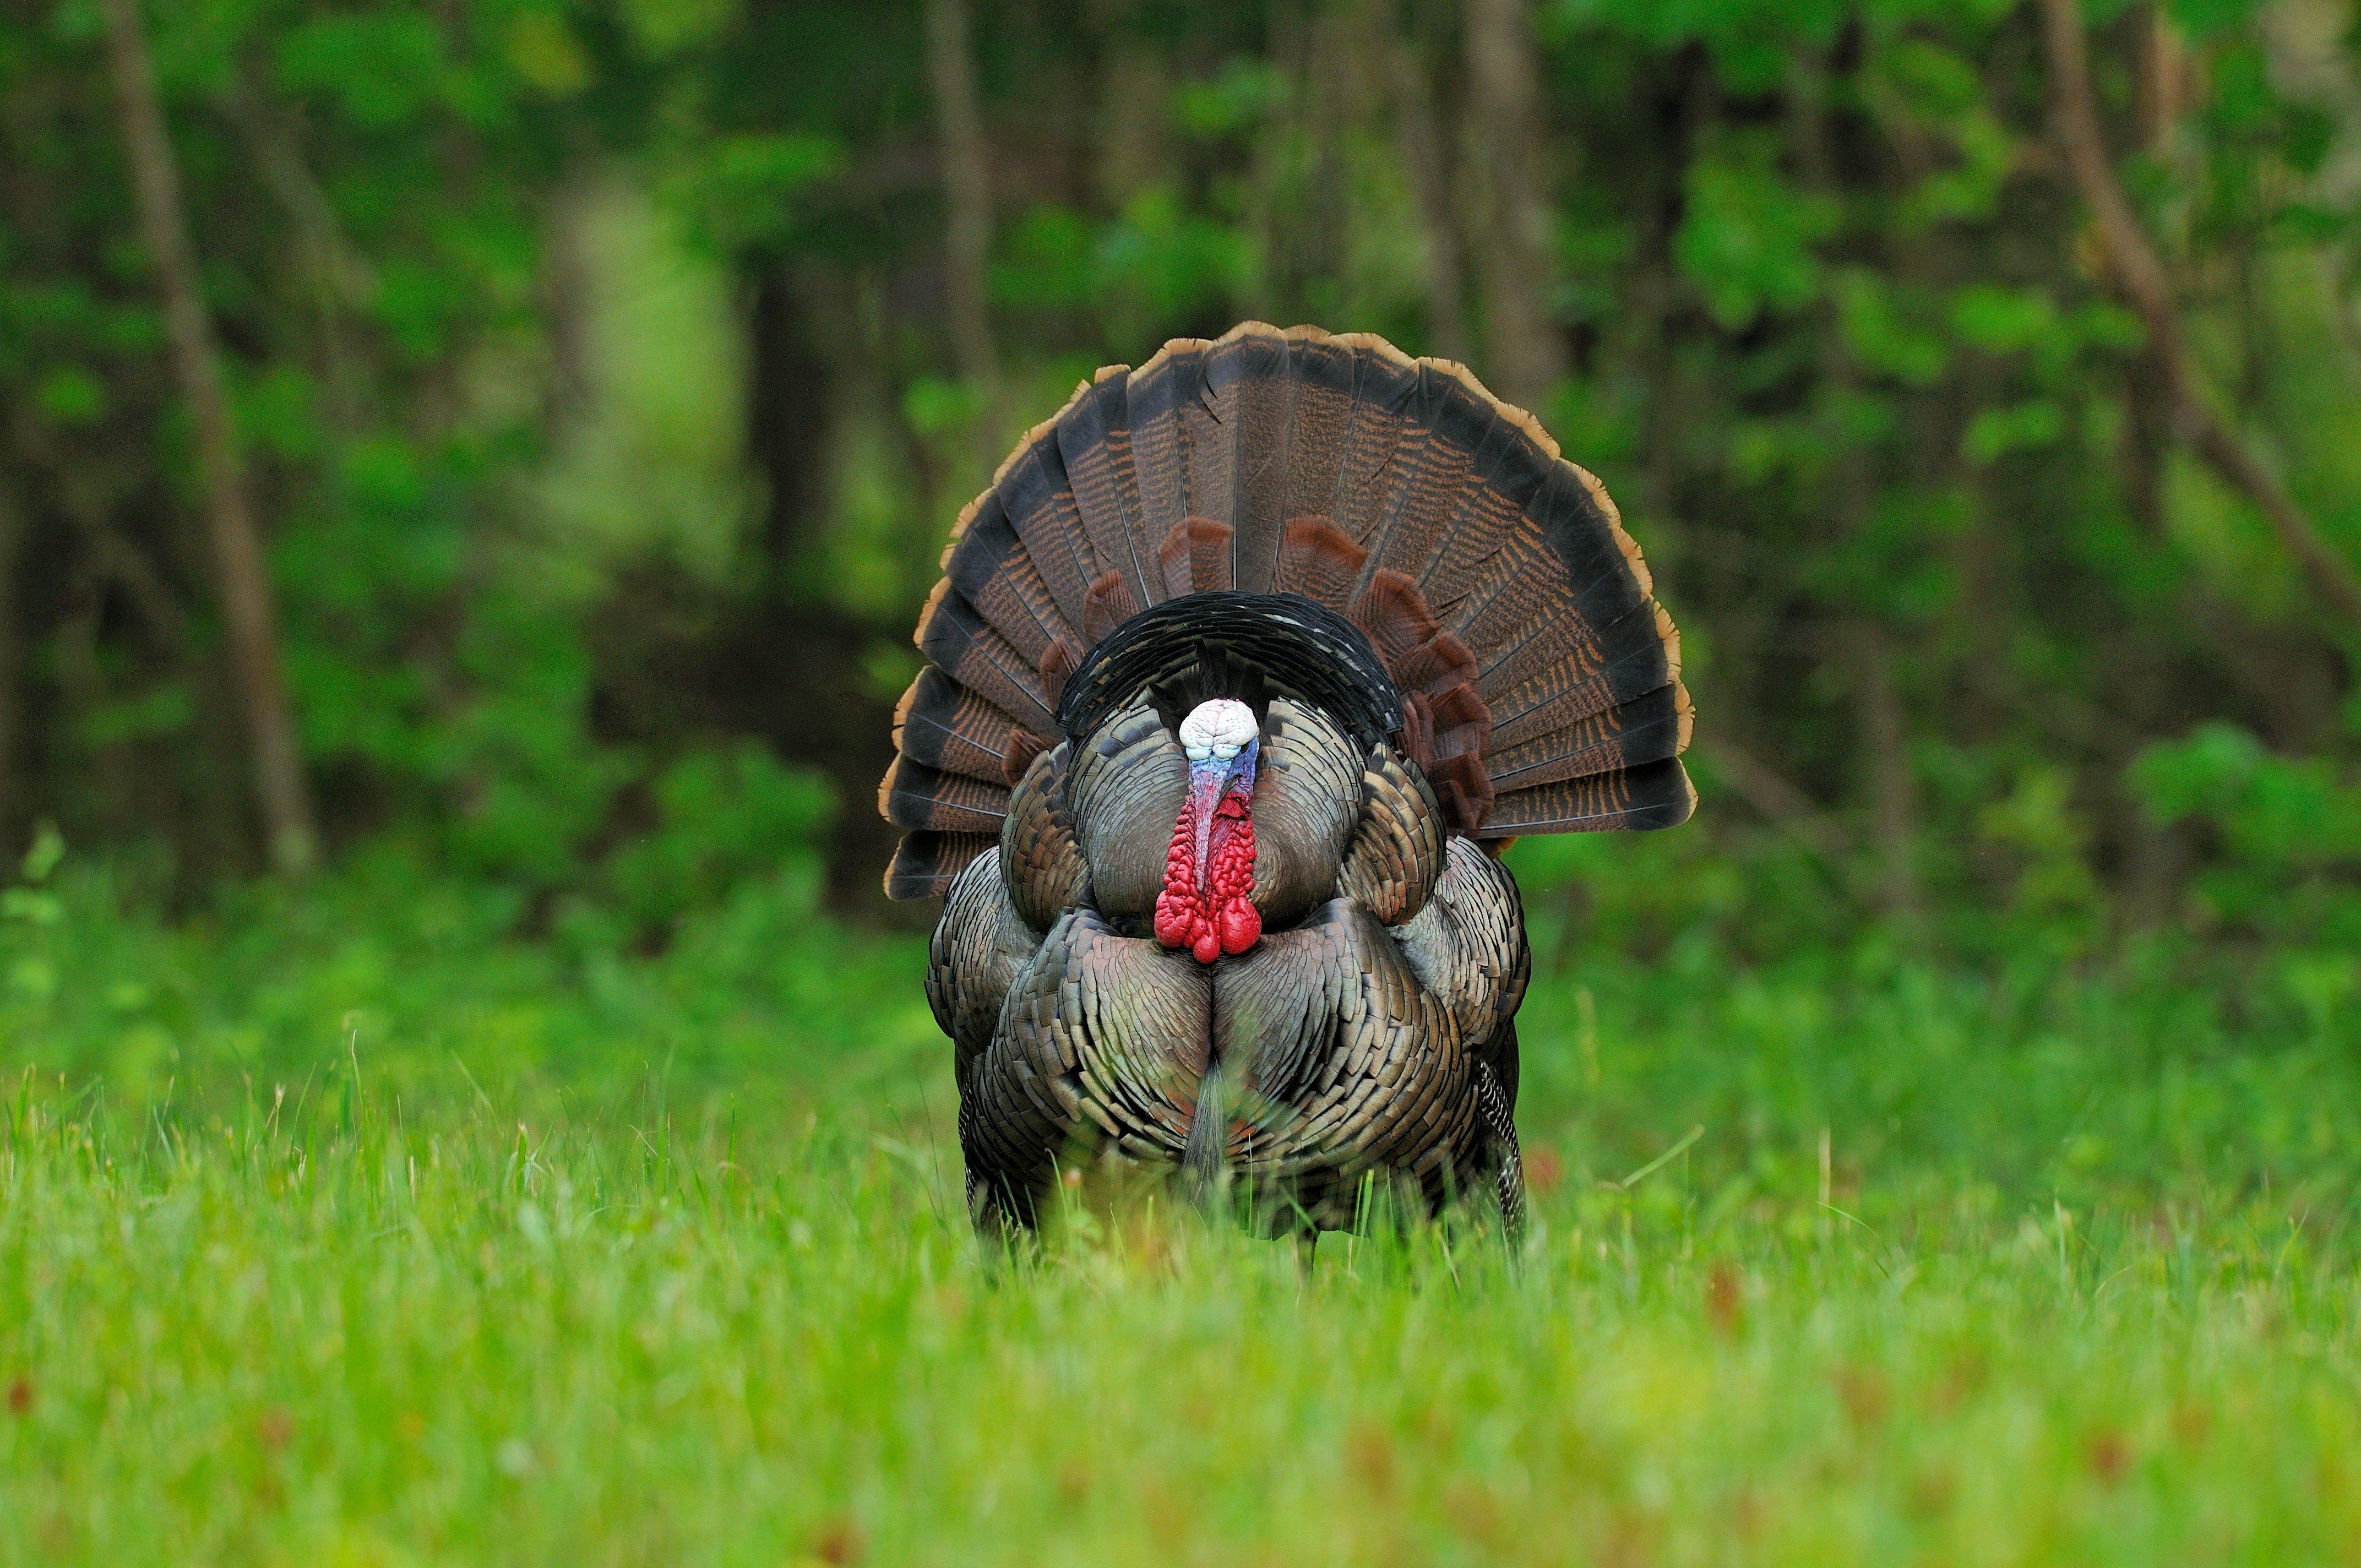 Turkey Hunting in New Jersey. Image by Tes Randle Jolly